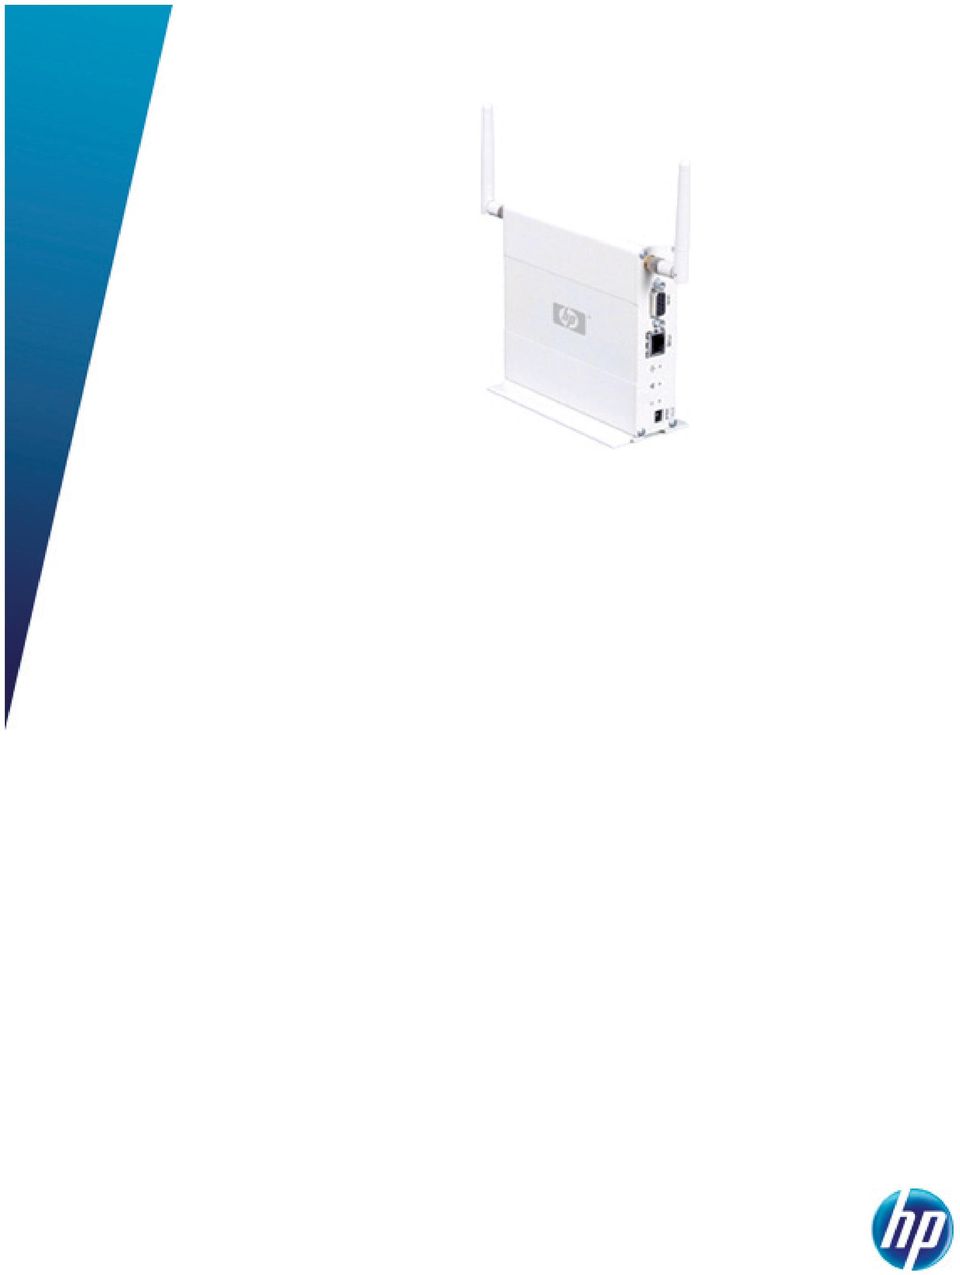 The E-M110 Access Point supports up to two Virtual Service Communities, each with independent VLAN and wireless security profiles. It is plenum-rated and powered by an IEEE 802.